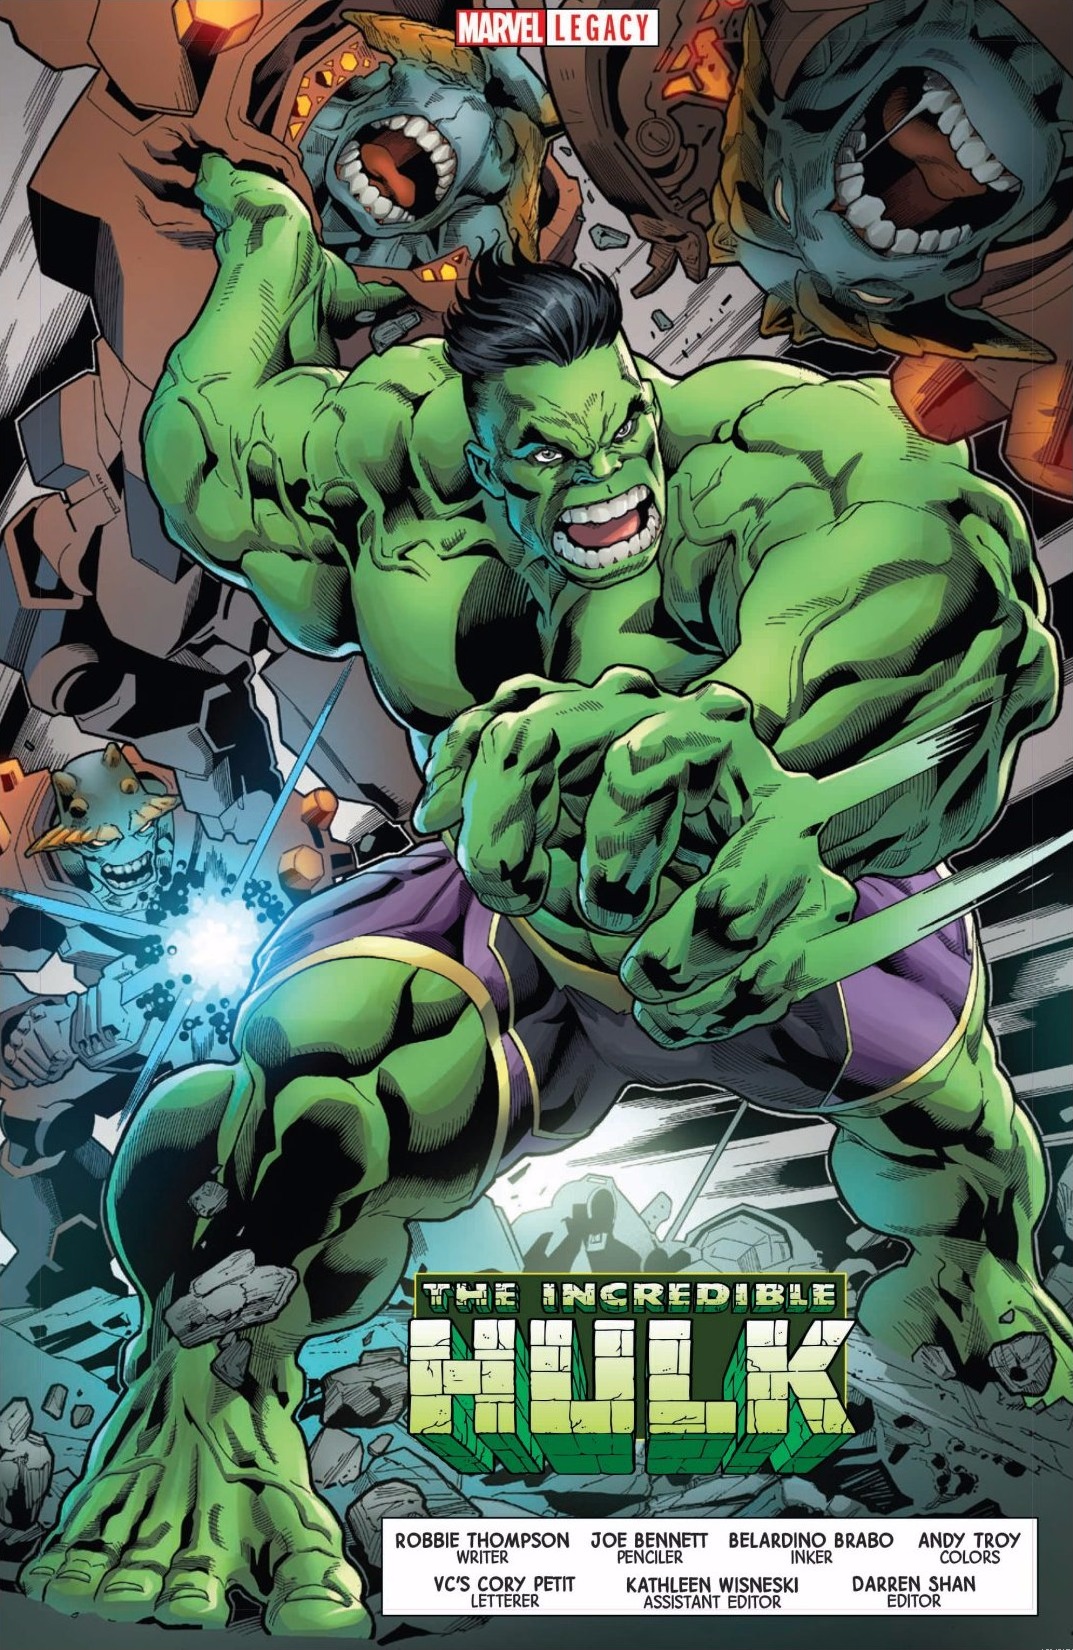 Read online Incredible Hulk (2017) comic -  Issue # Issue Incredible Hulk - Marvel Legacy Primer Pages - 4